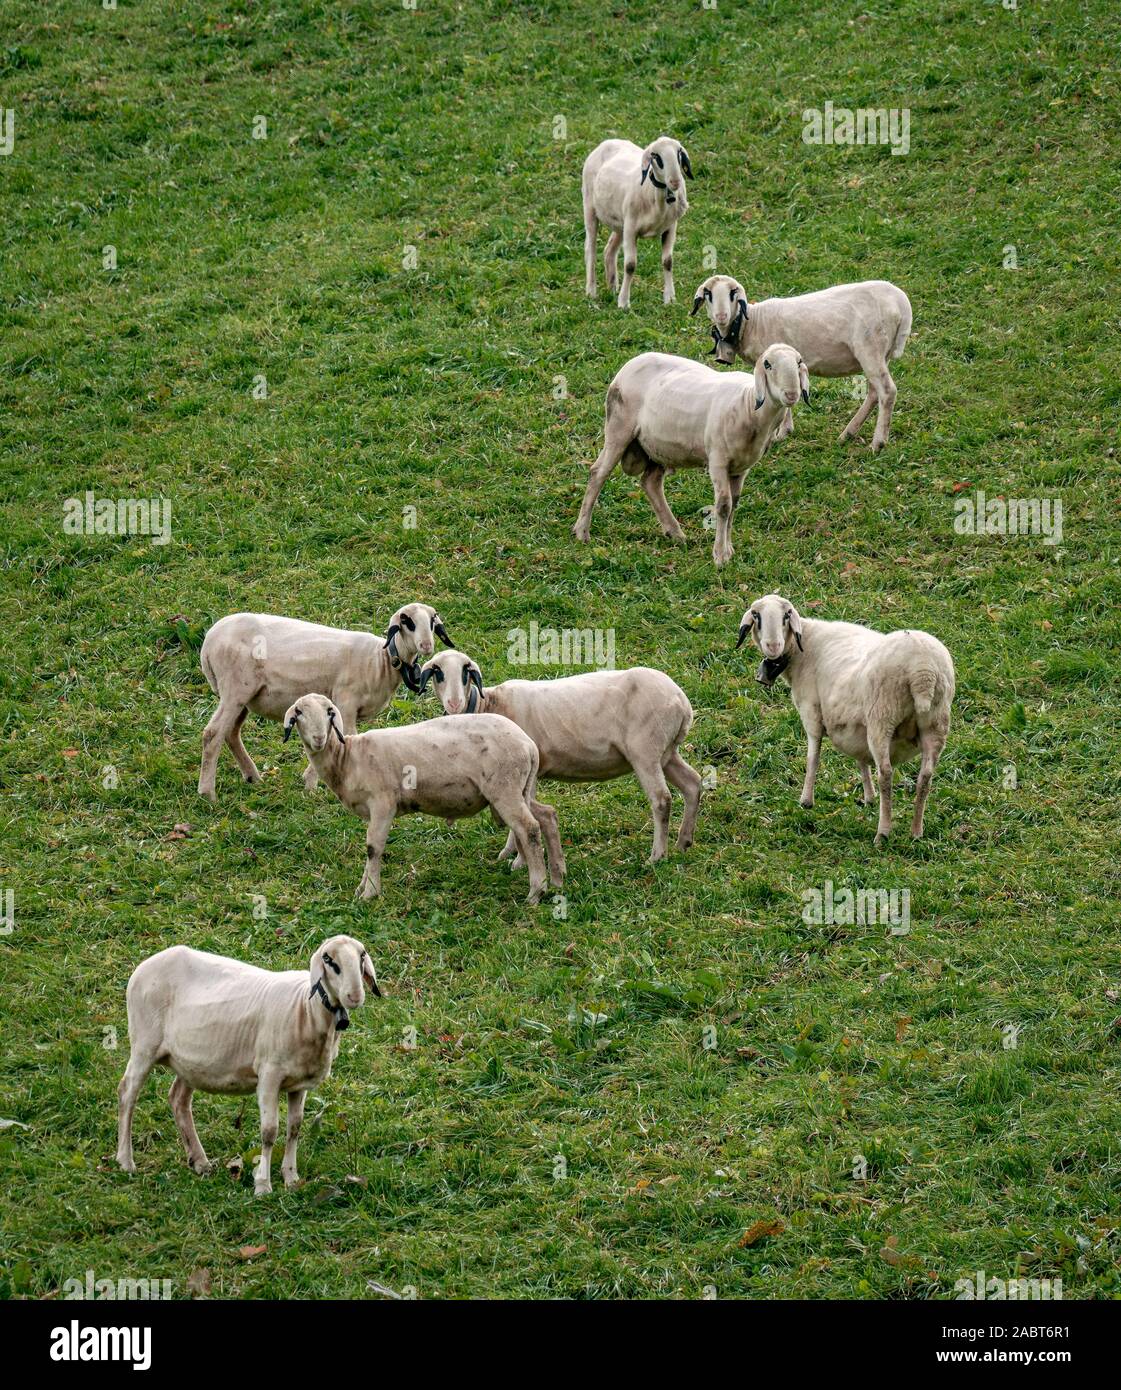 A group of the rare and protected breed Villnoesser spectacles sheep (Brillenschaf) in Italy on a pasture in St Maddalena looking curiously Stock Photo